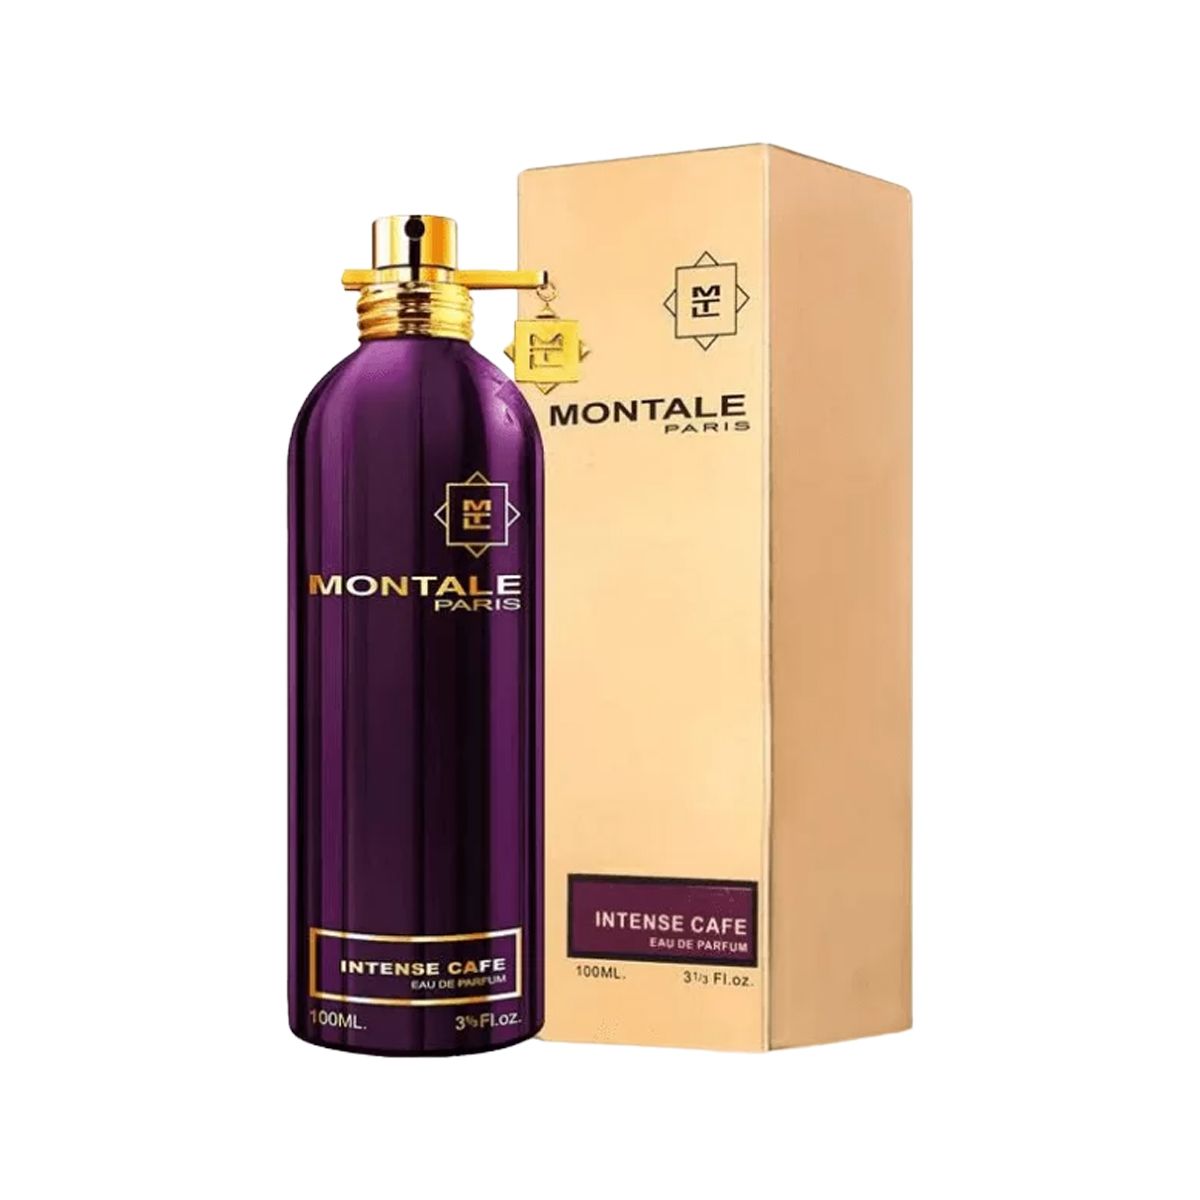  Montale Intense Cafe 